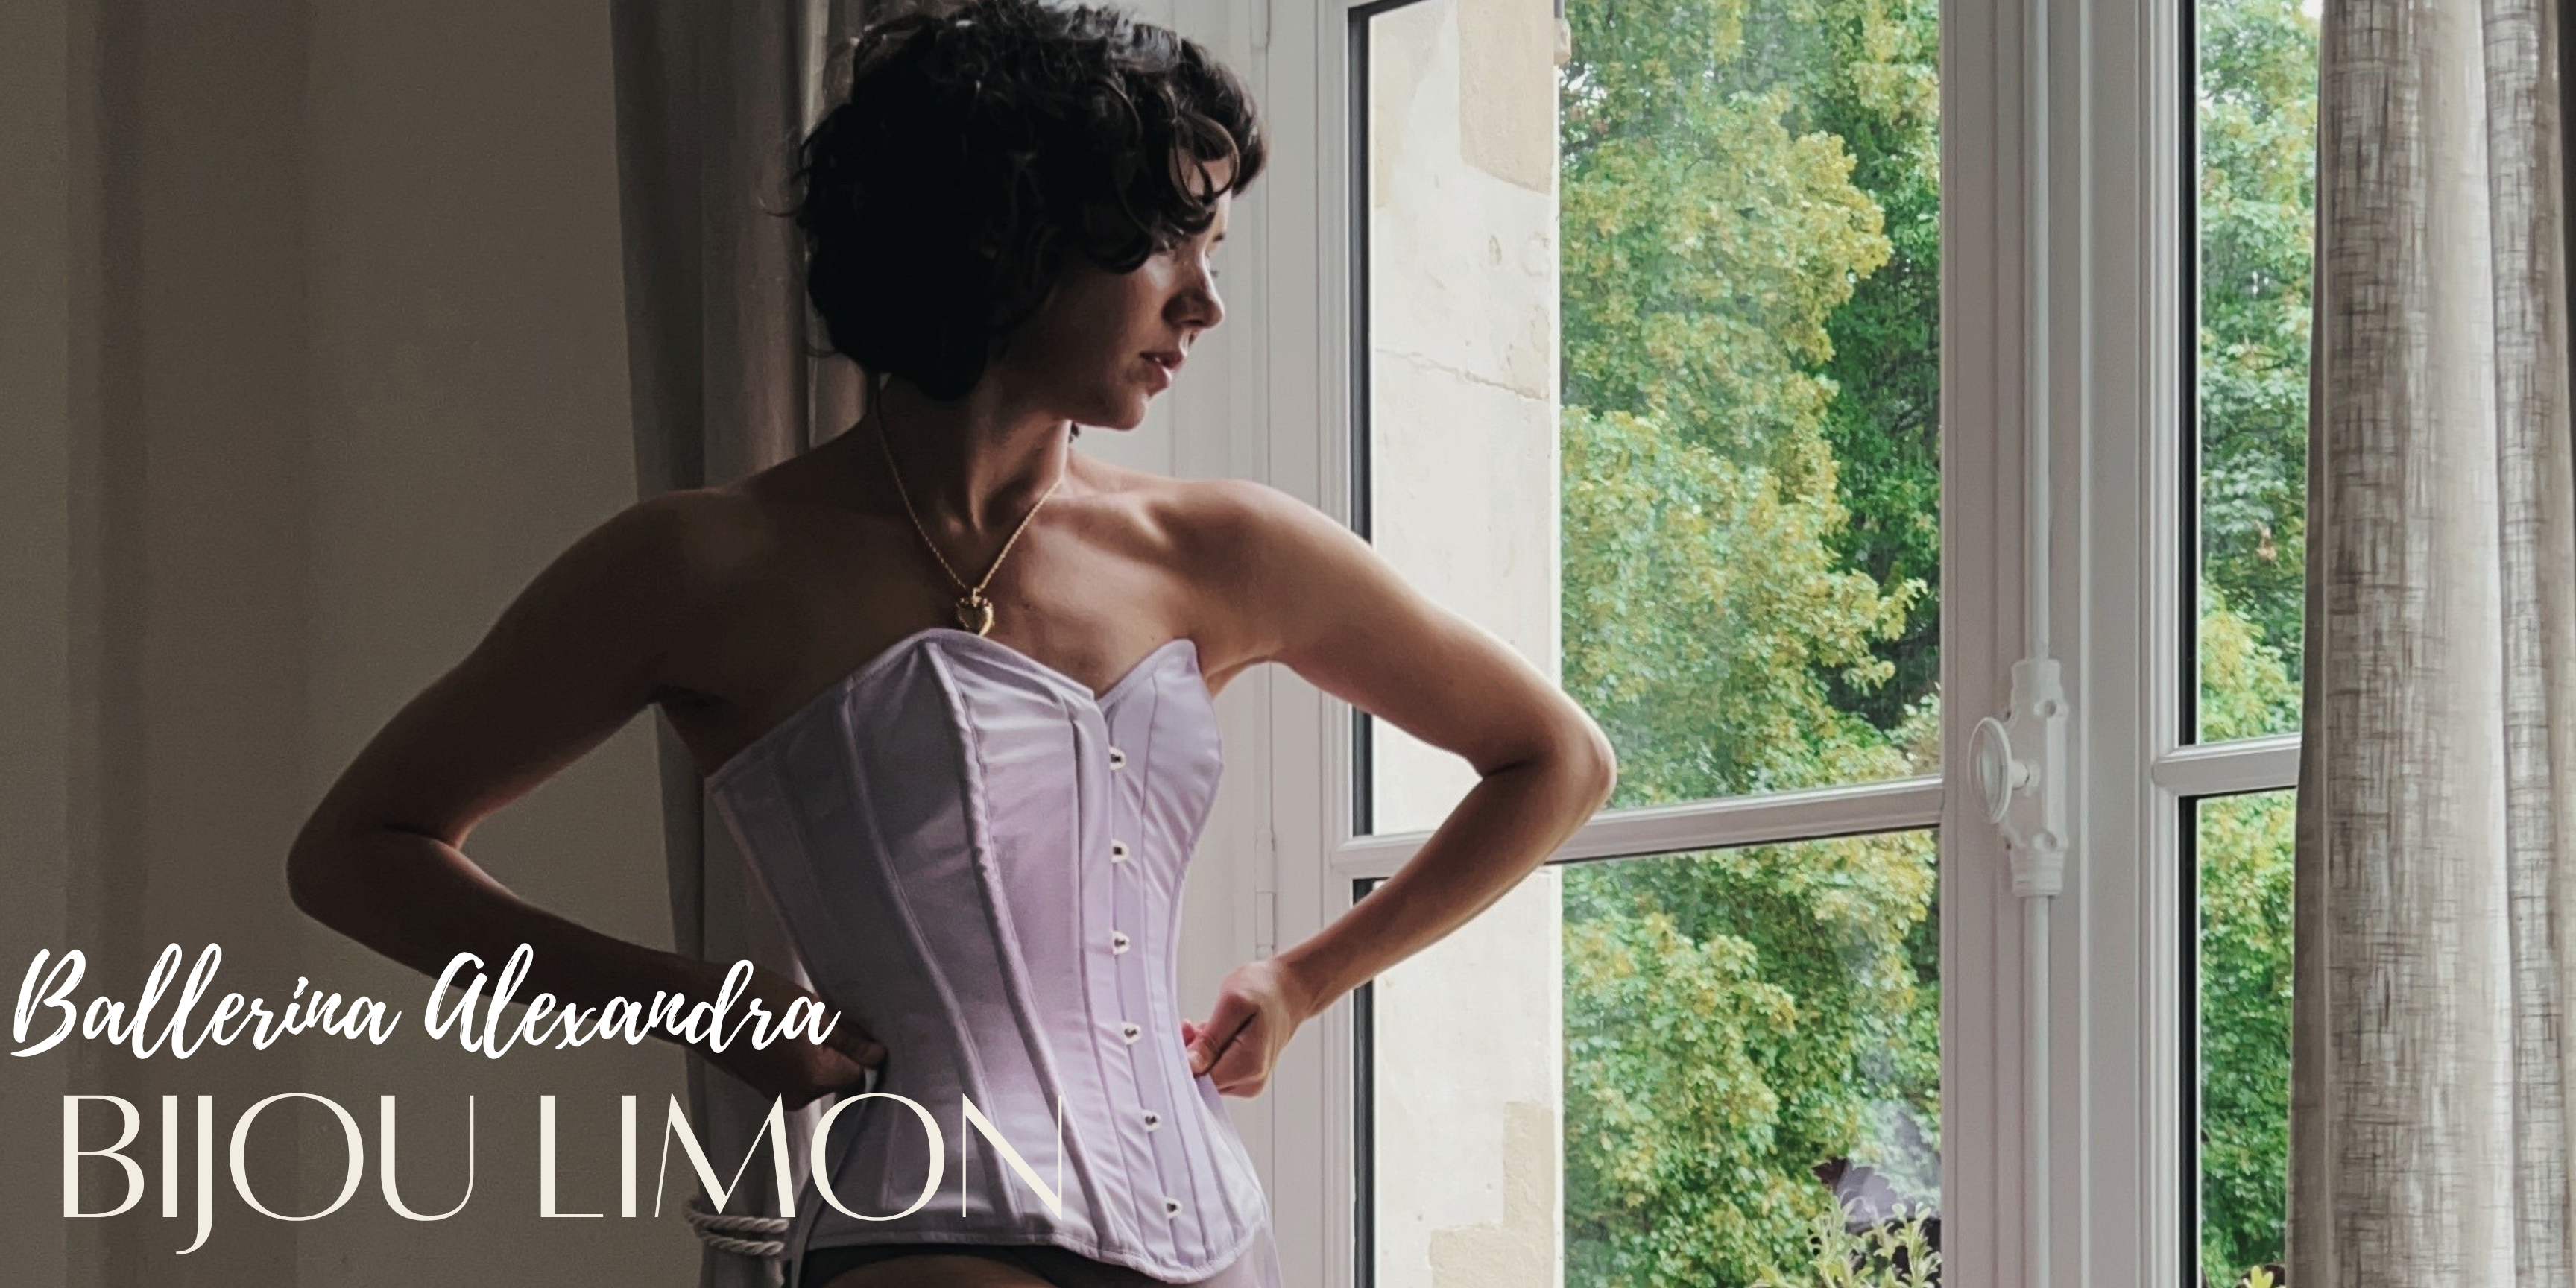 A Creative Collaboration: Alexandra Light, Bijou Limon Jewelry, and a Century-Old French Chateau